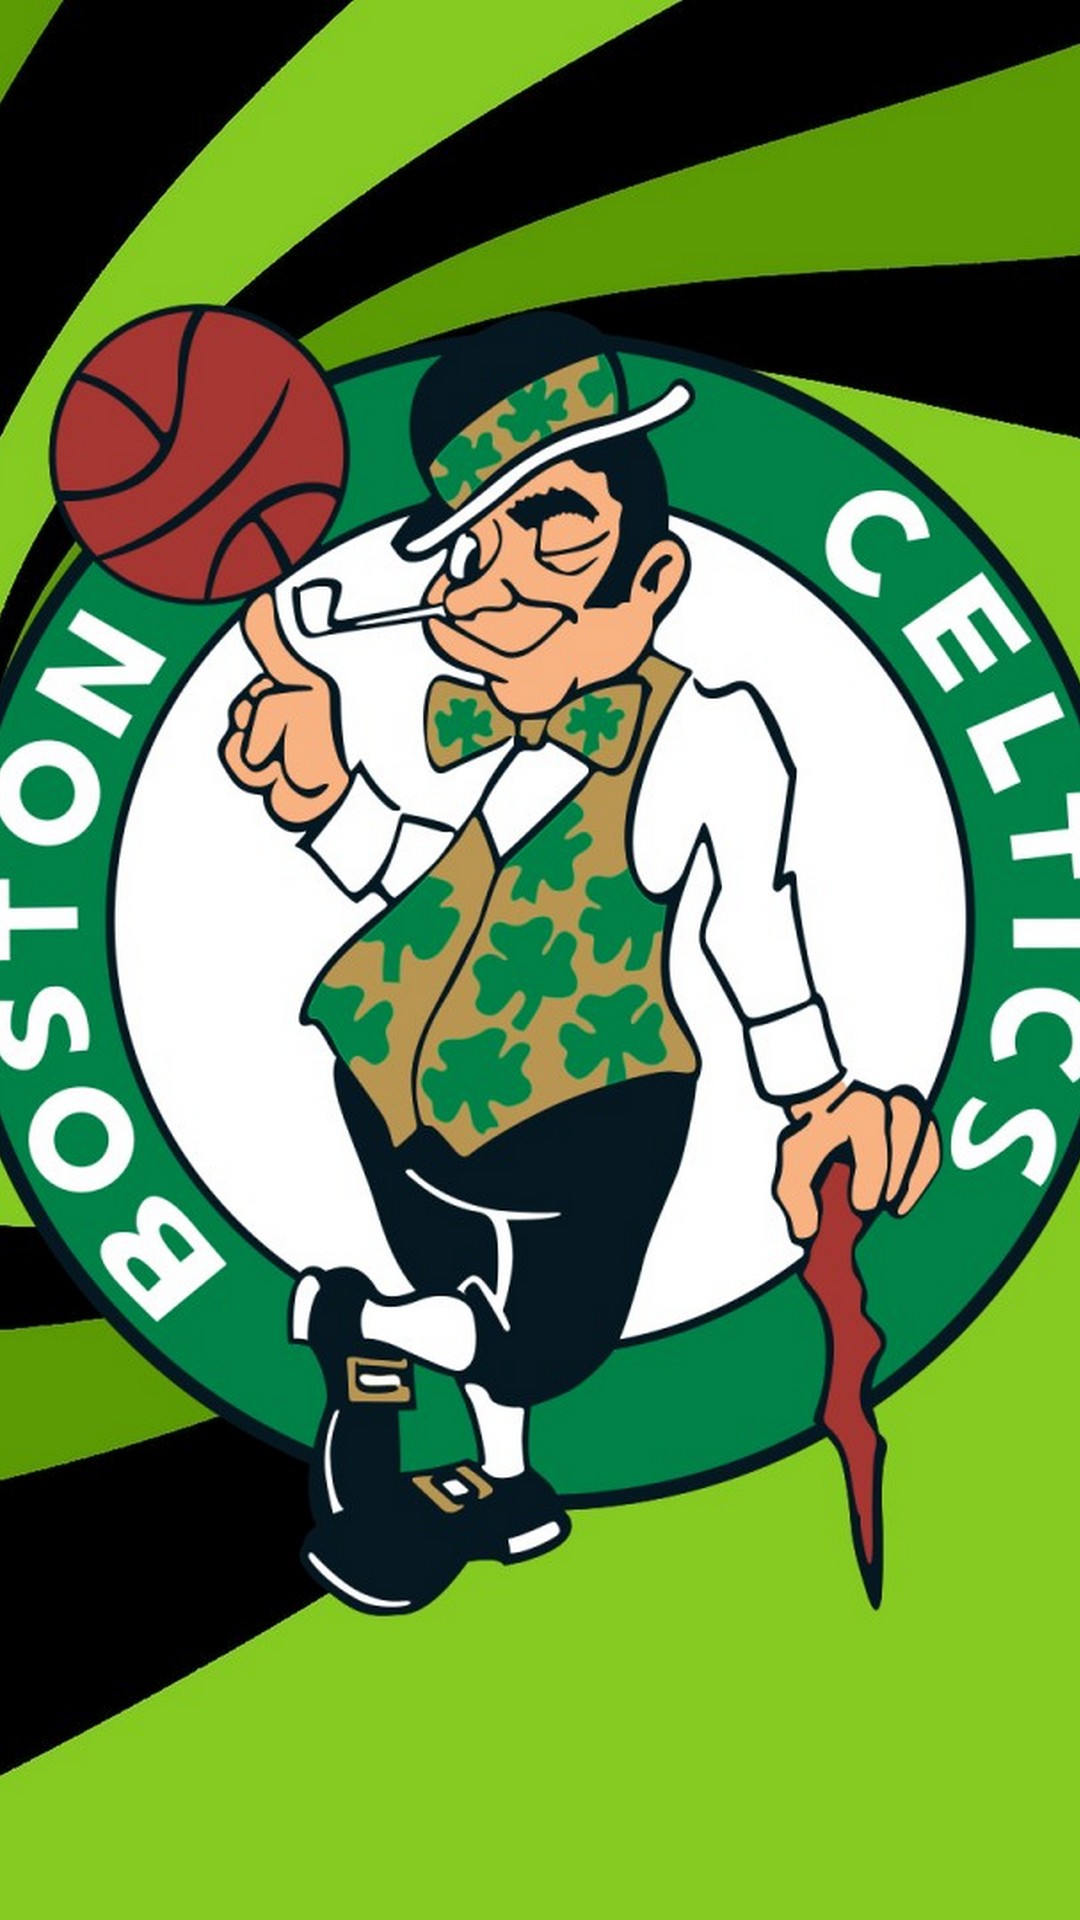 iPhone Wallpaper HD Boston Celtics with image resolution 1080x1920 pixel. You can make this wallpaper for your Desktop Computer Backgrounds, Mac Wallpapers, Android Lock screen or iPhone Screensavers